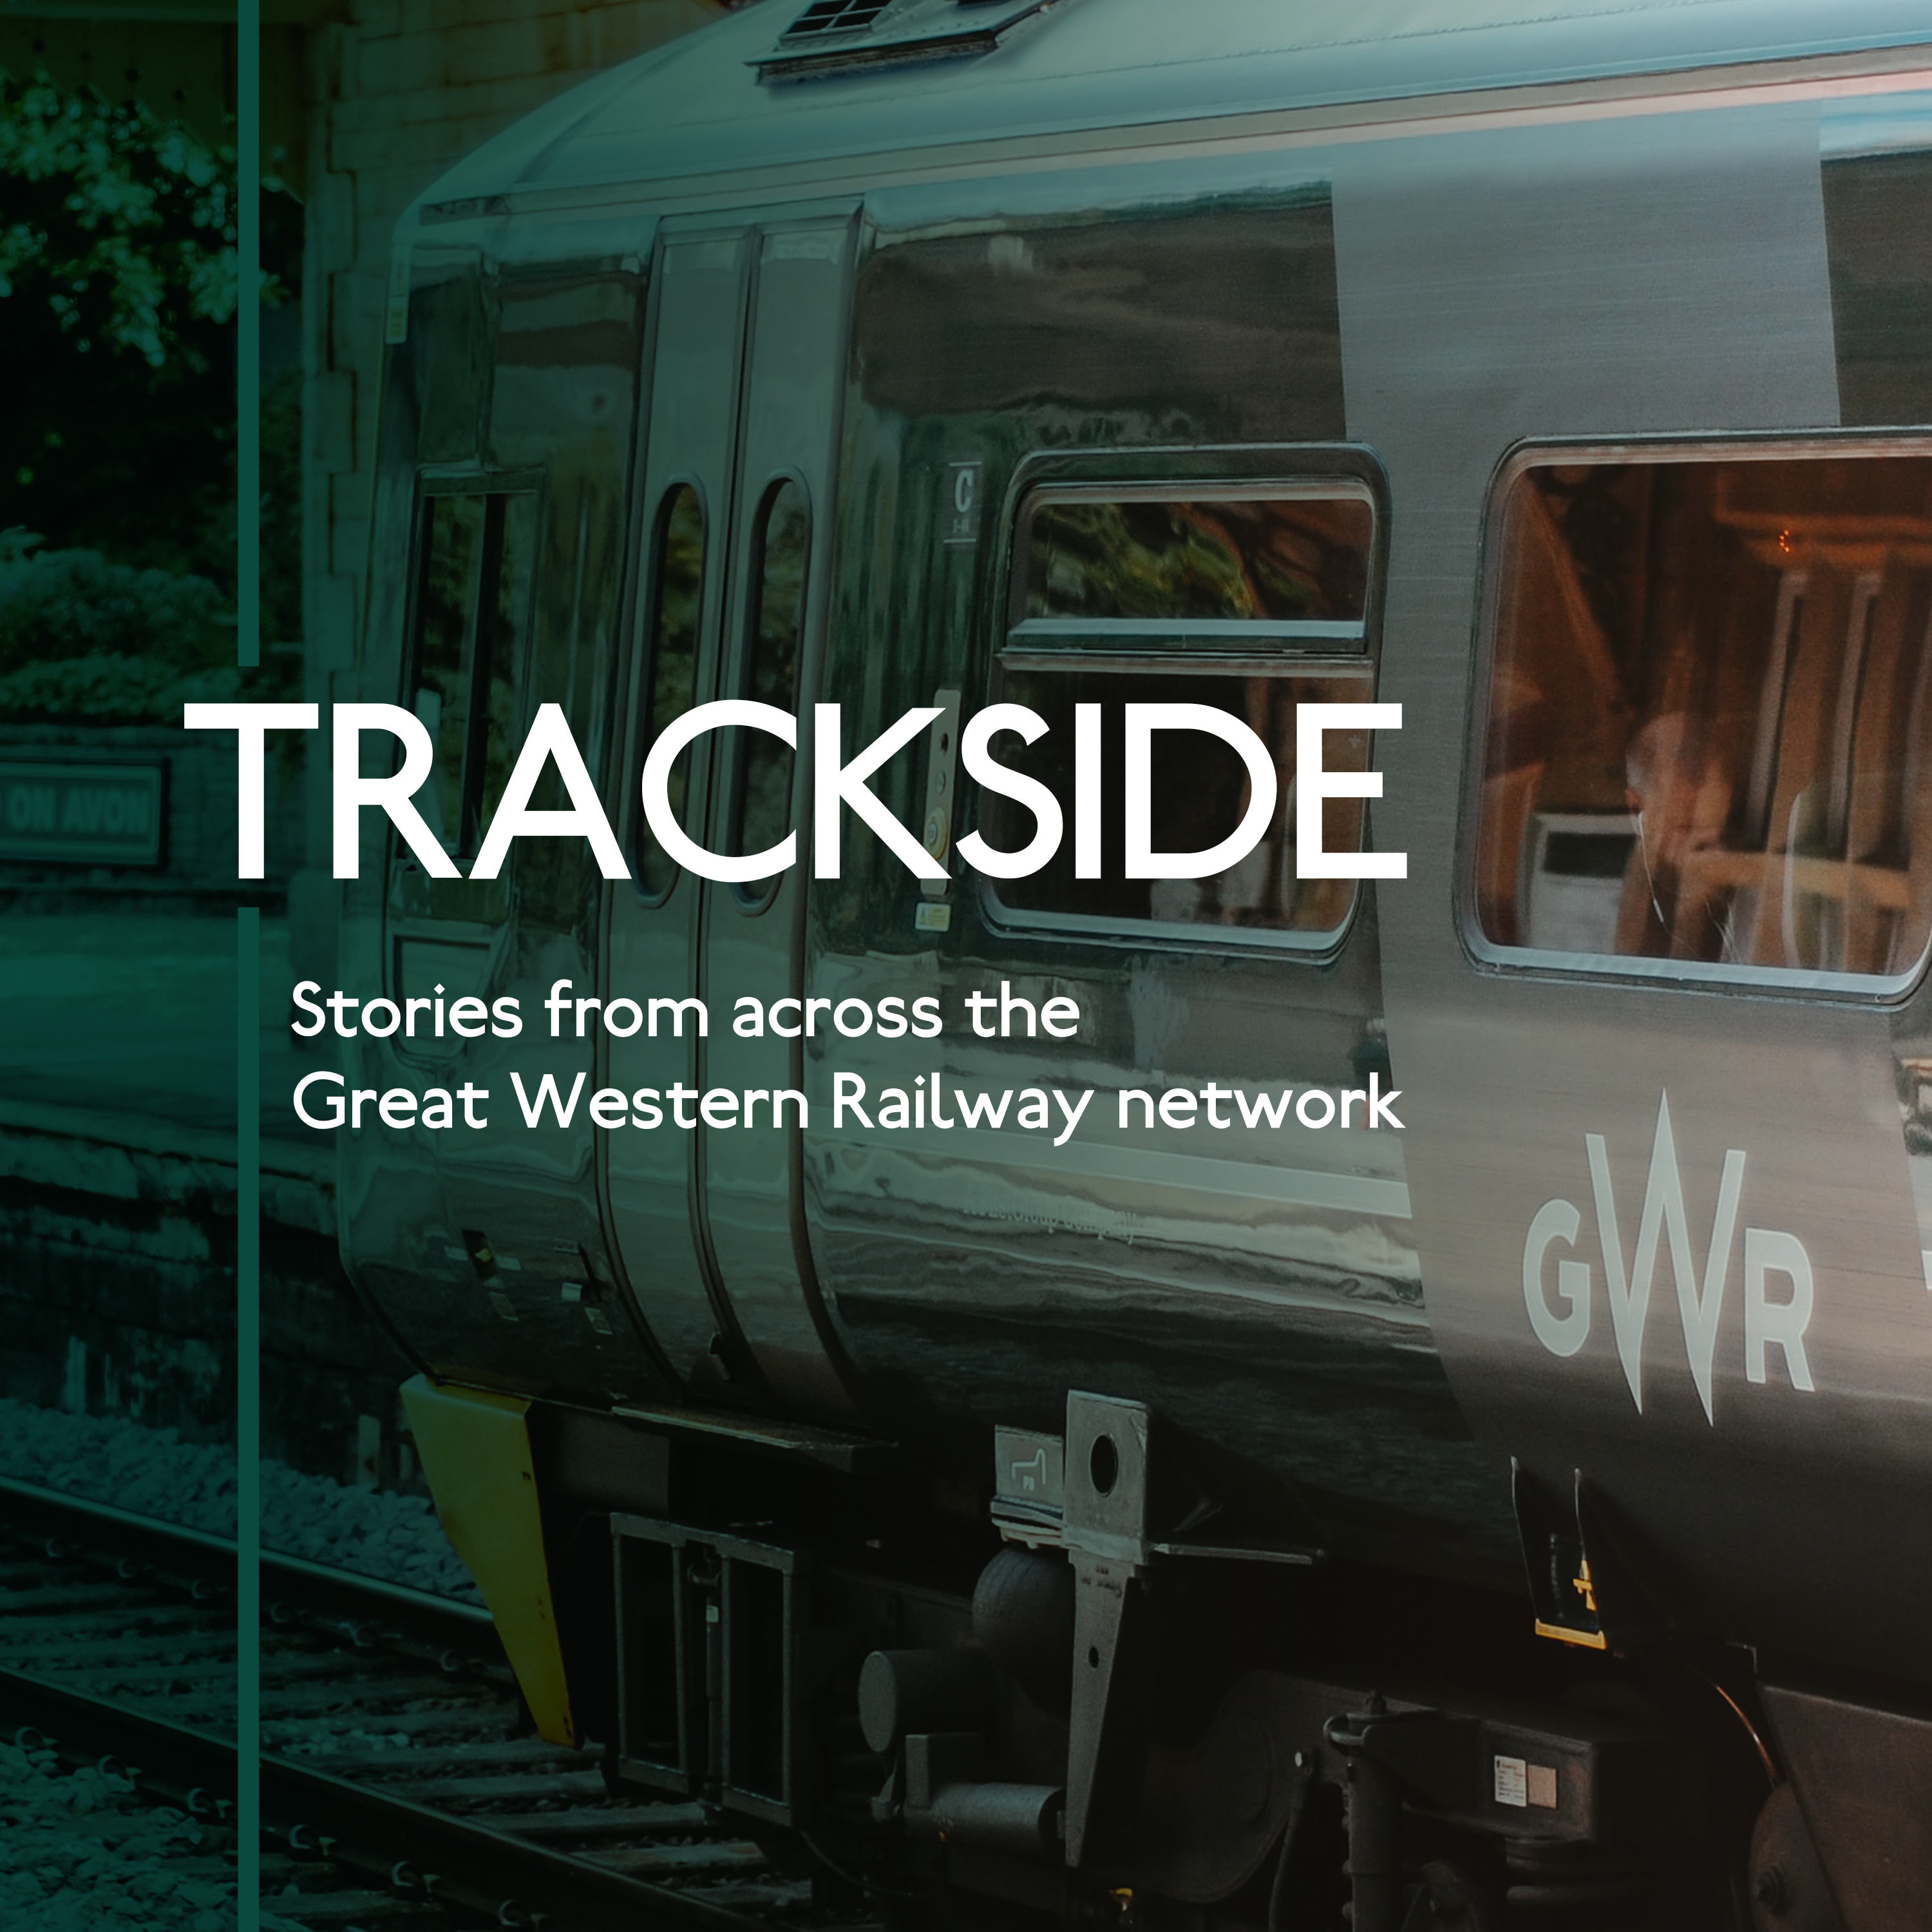 Bristol: Growing up in the City (GWR Trackside)